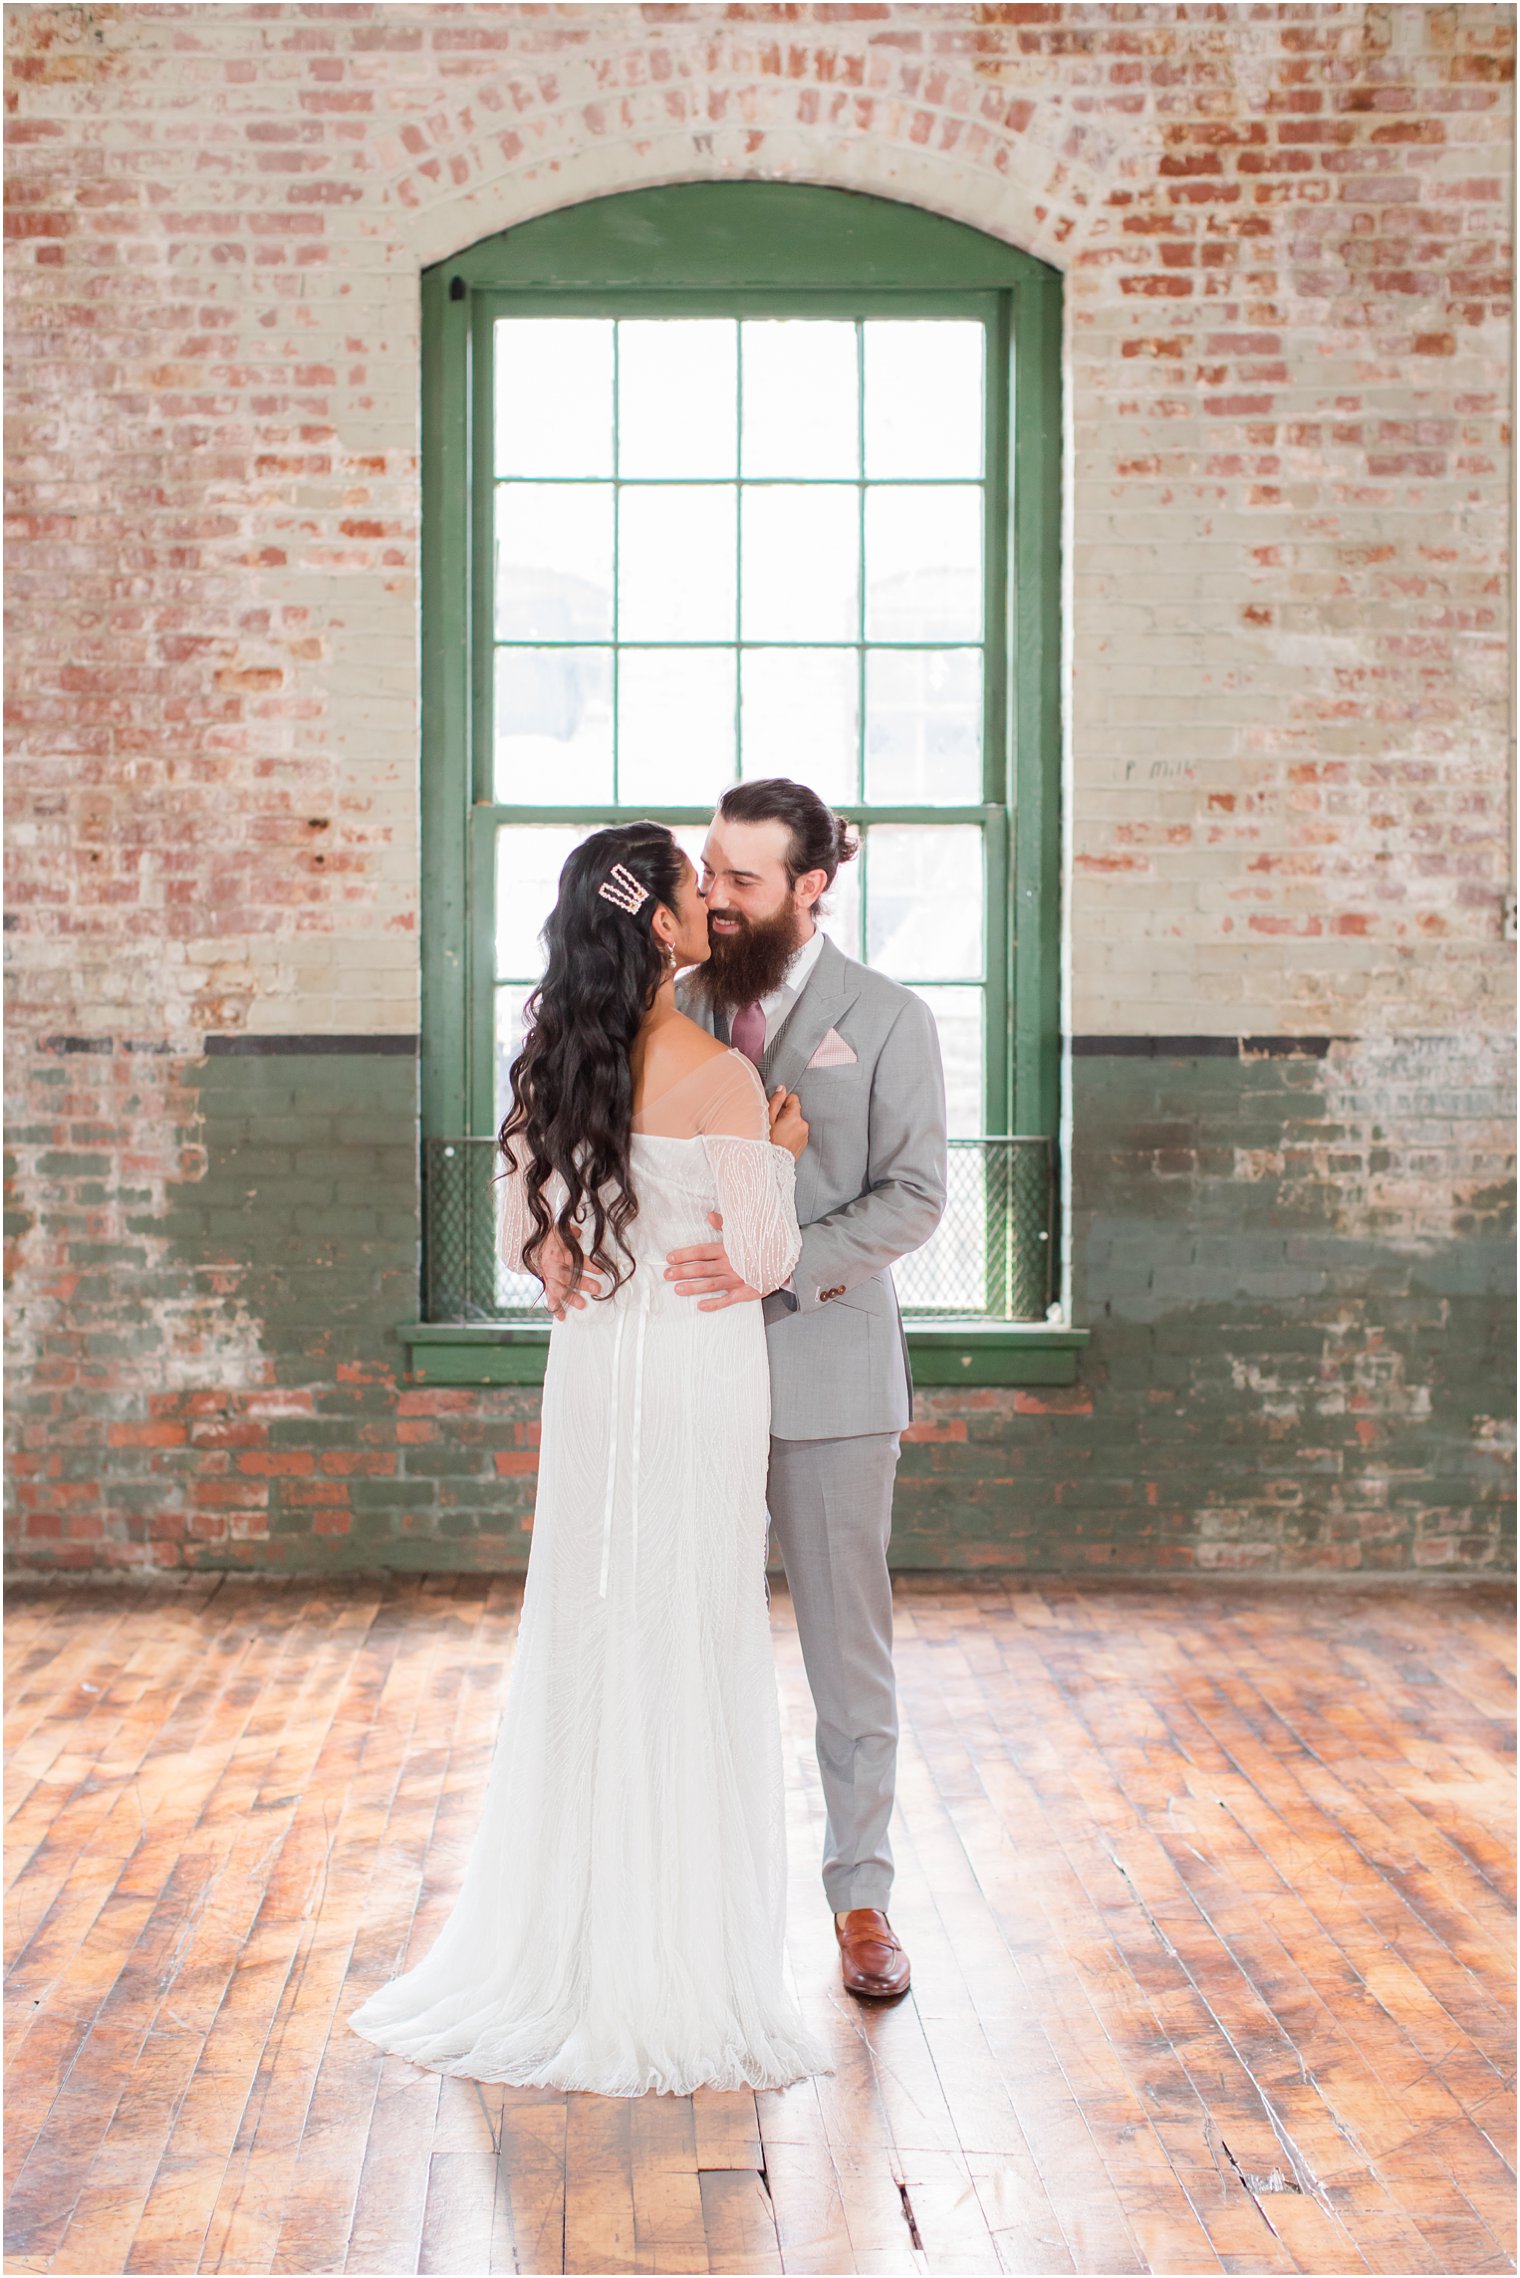 Bride and groom photos at Art Factory Studios in Paterson, NJ